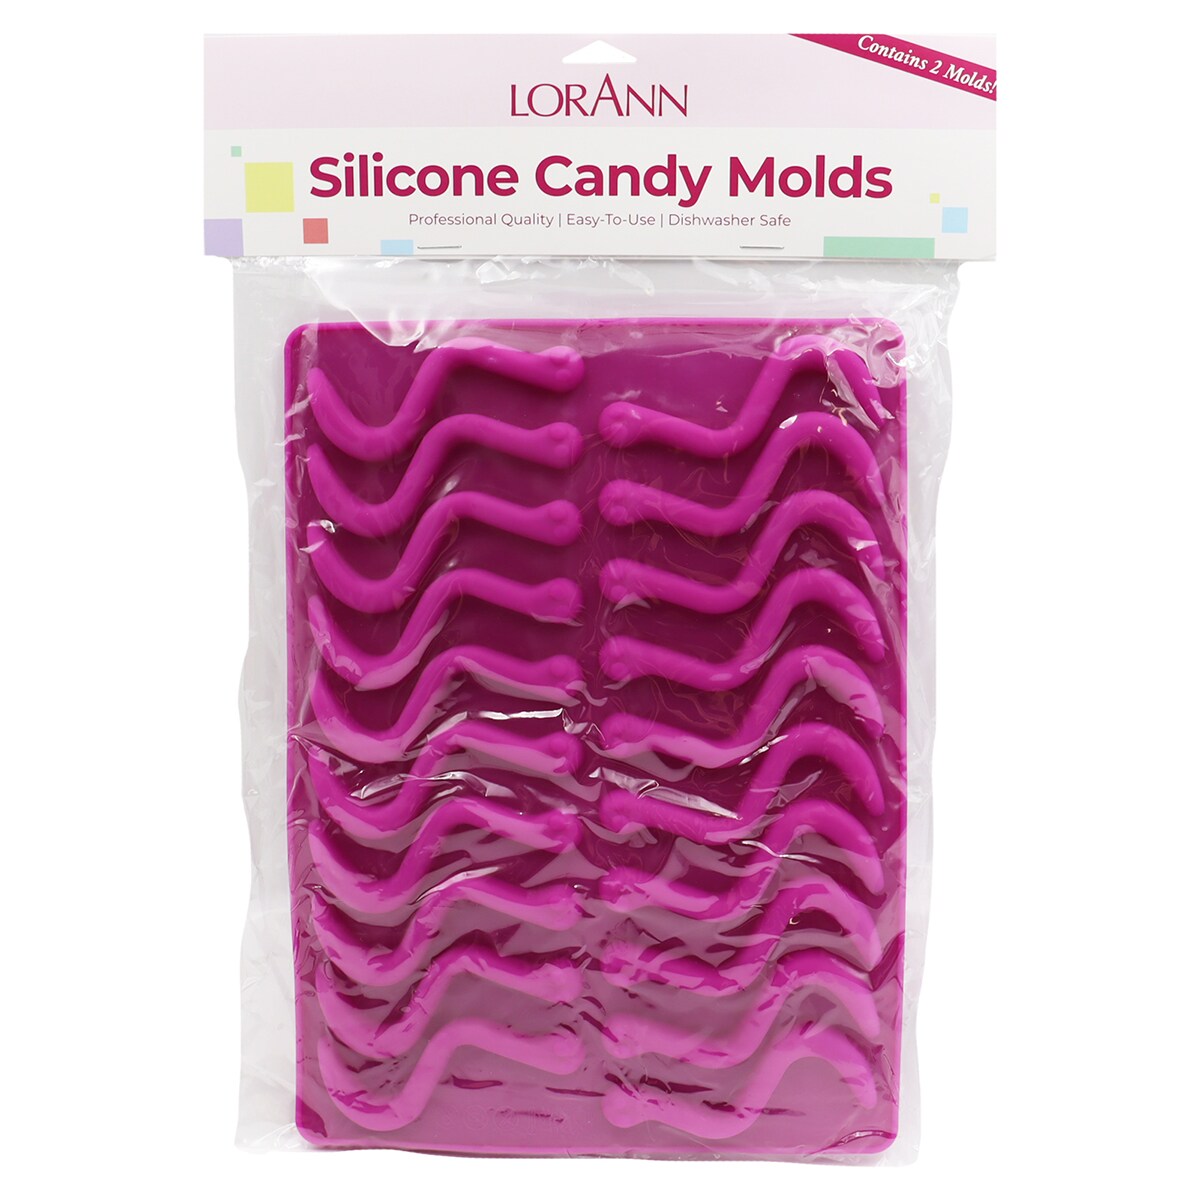 Silicone Gummy Worm Molds, 2-Pack by Lorann Flavors